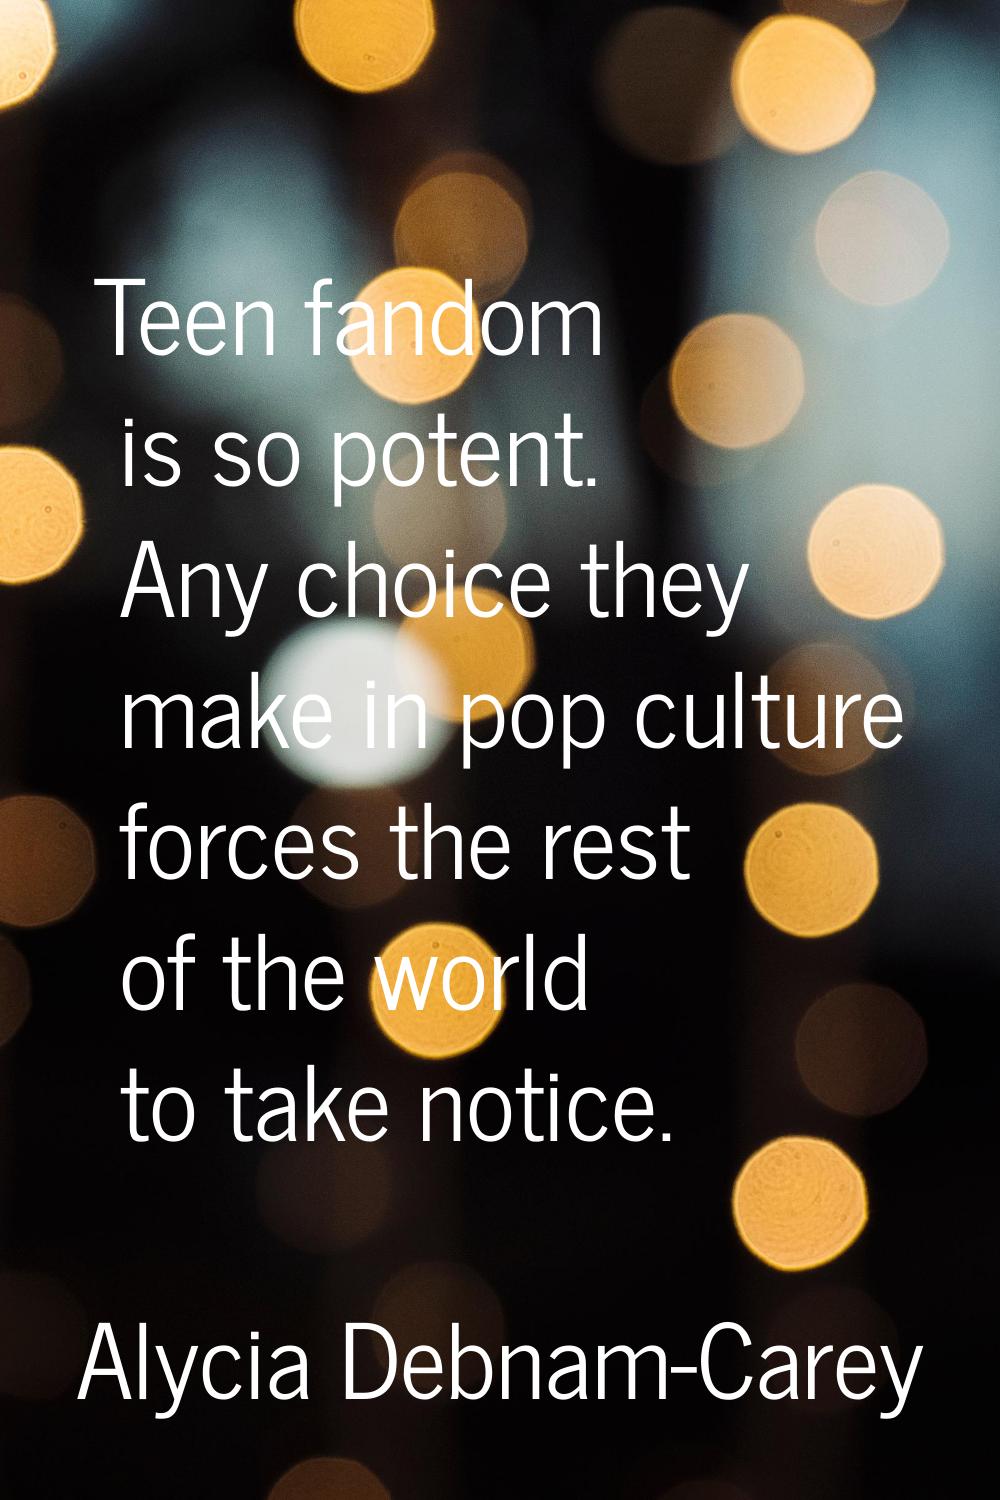 Teen fandom is so potent. Any choice they make in pop culture forces the rest of the world to take 